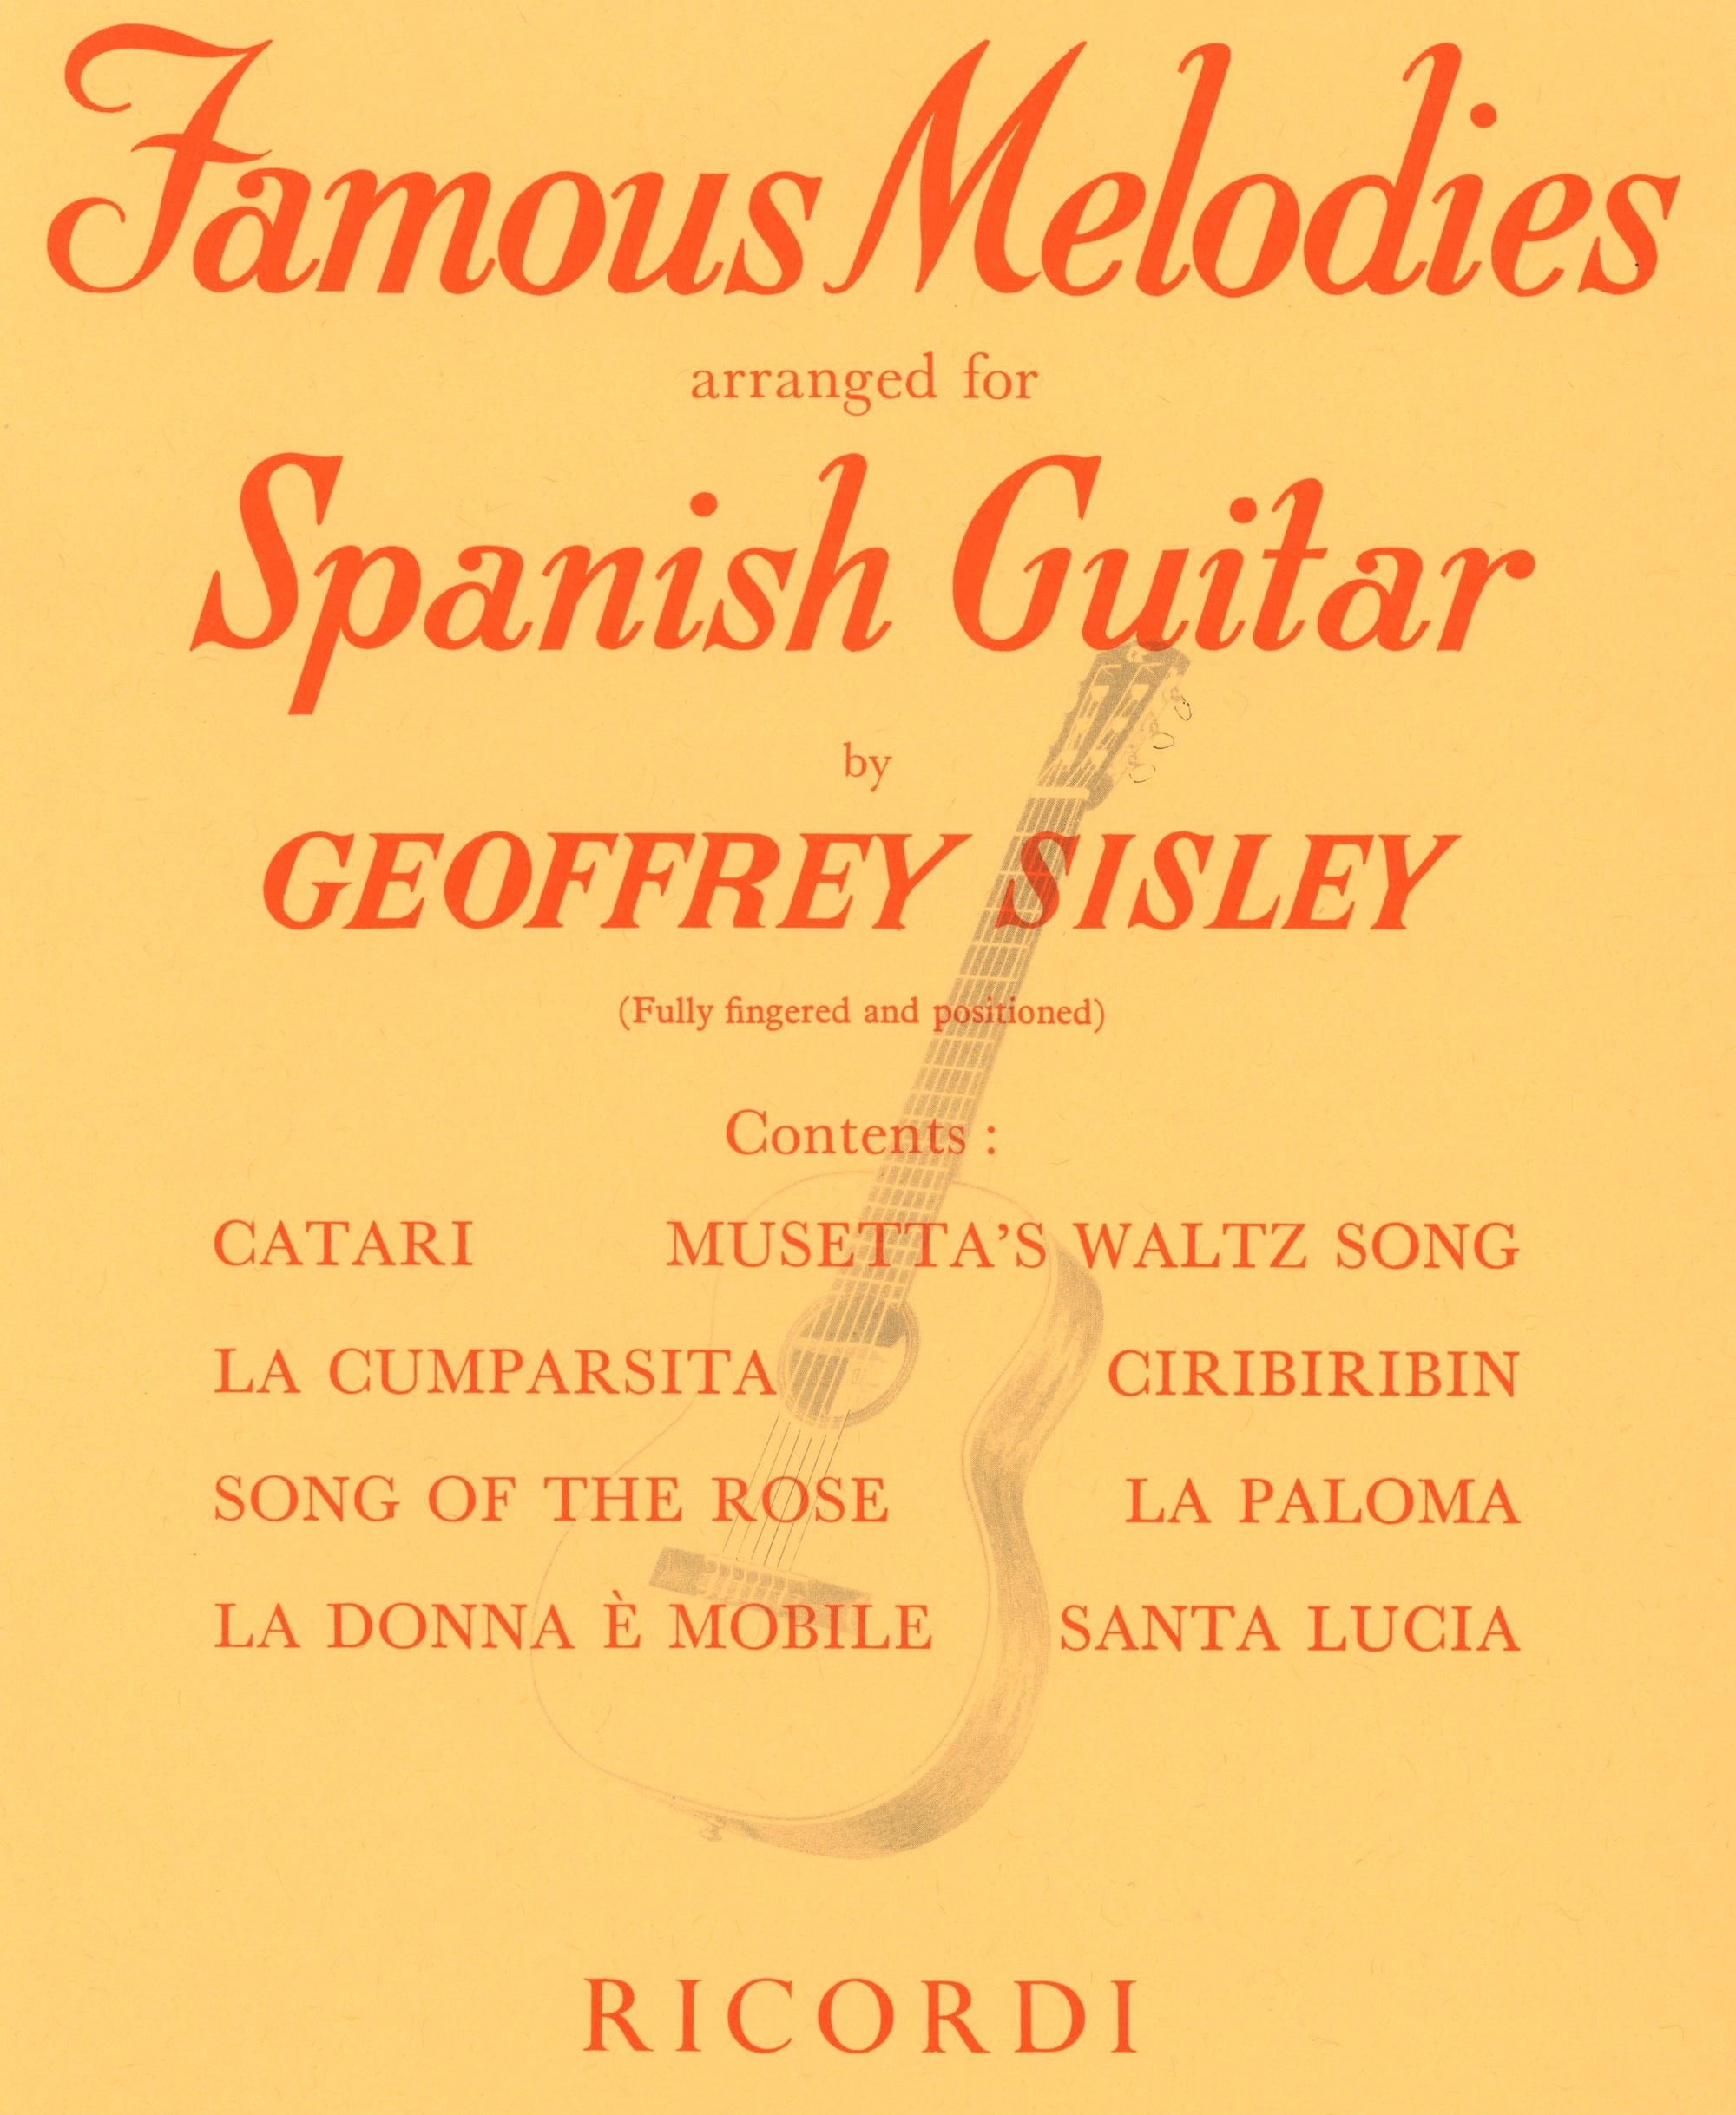 Famous Melodies arranged for Spanish Guitar